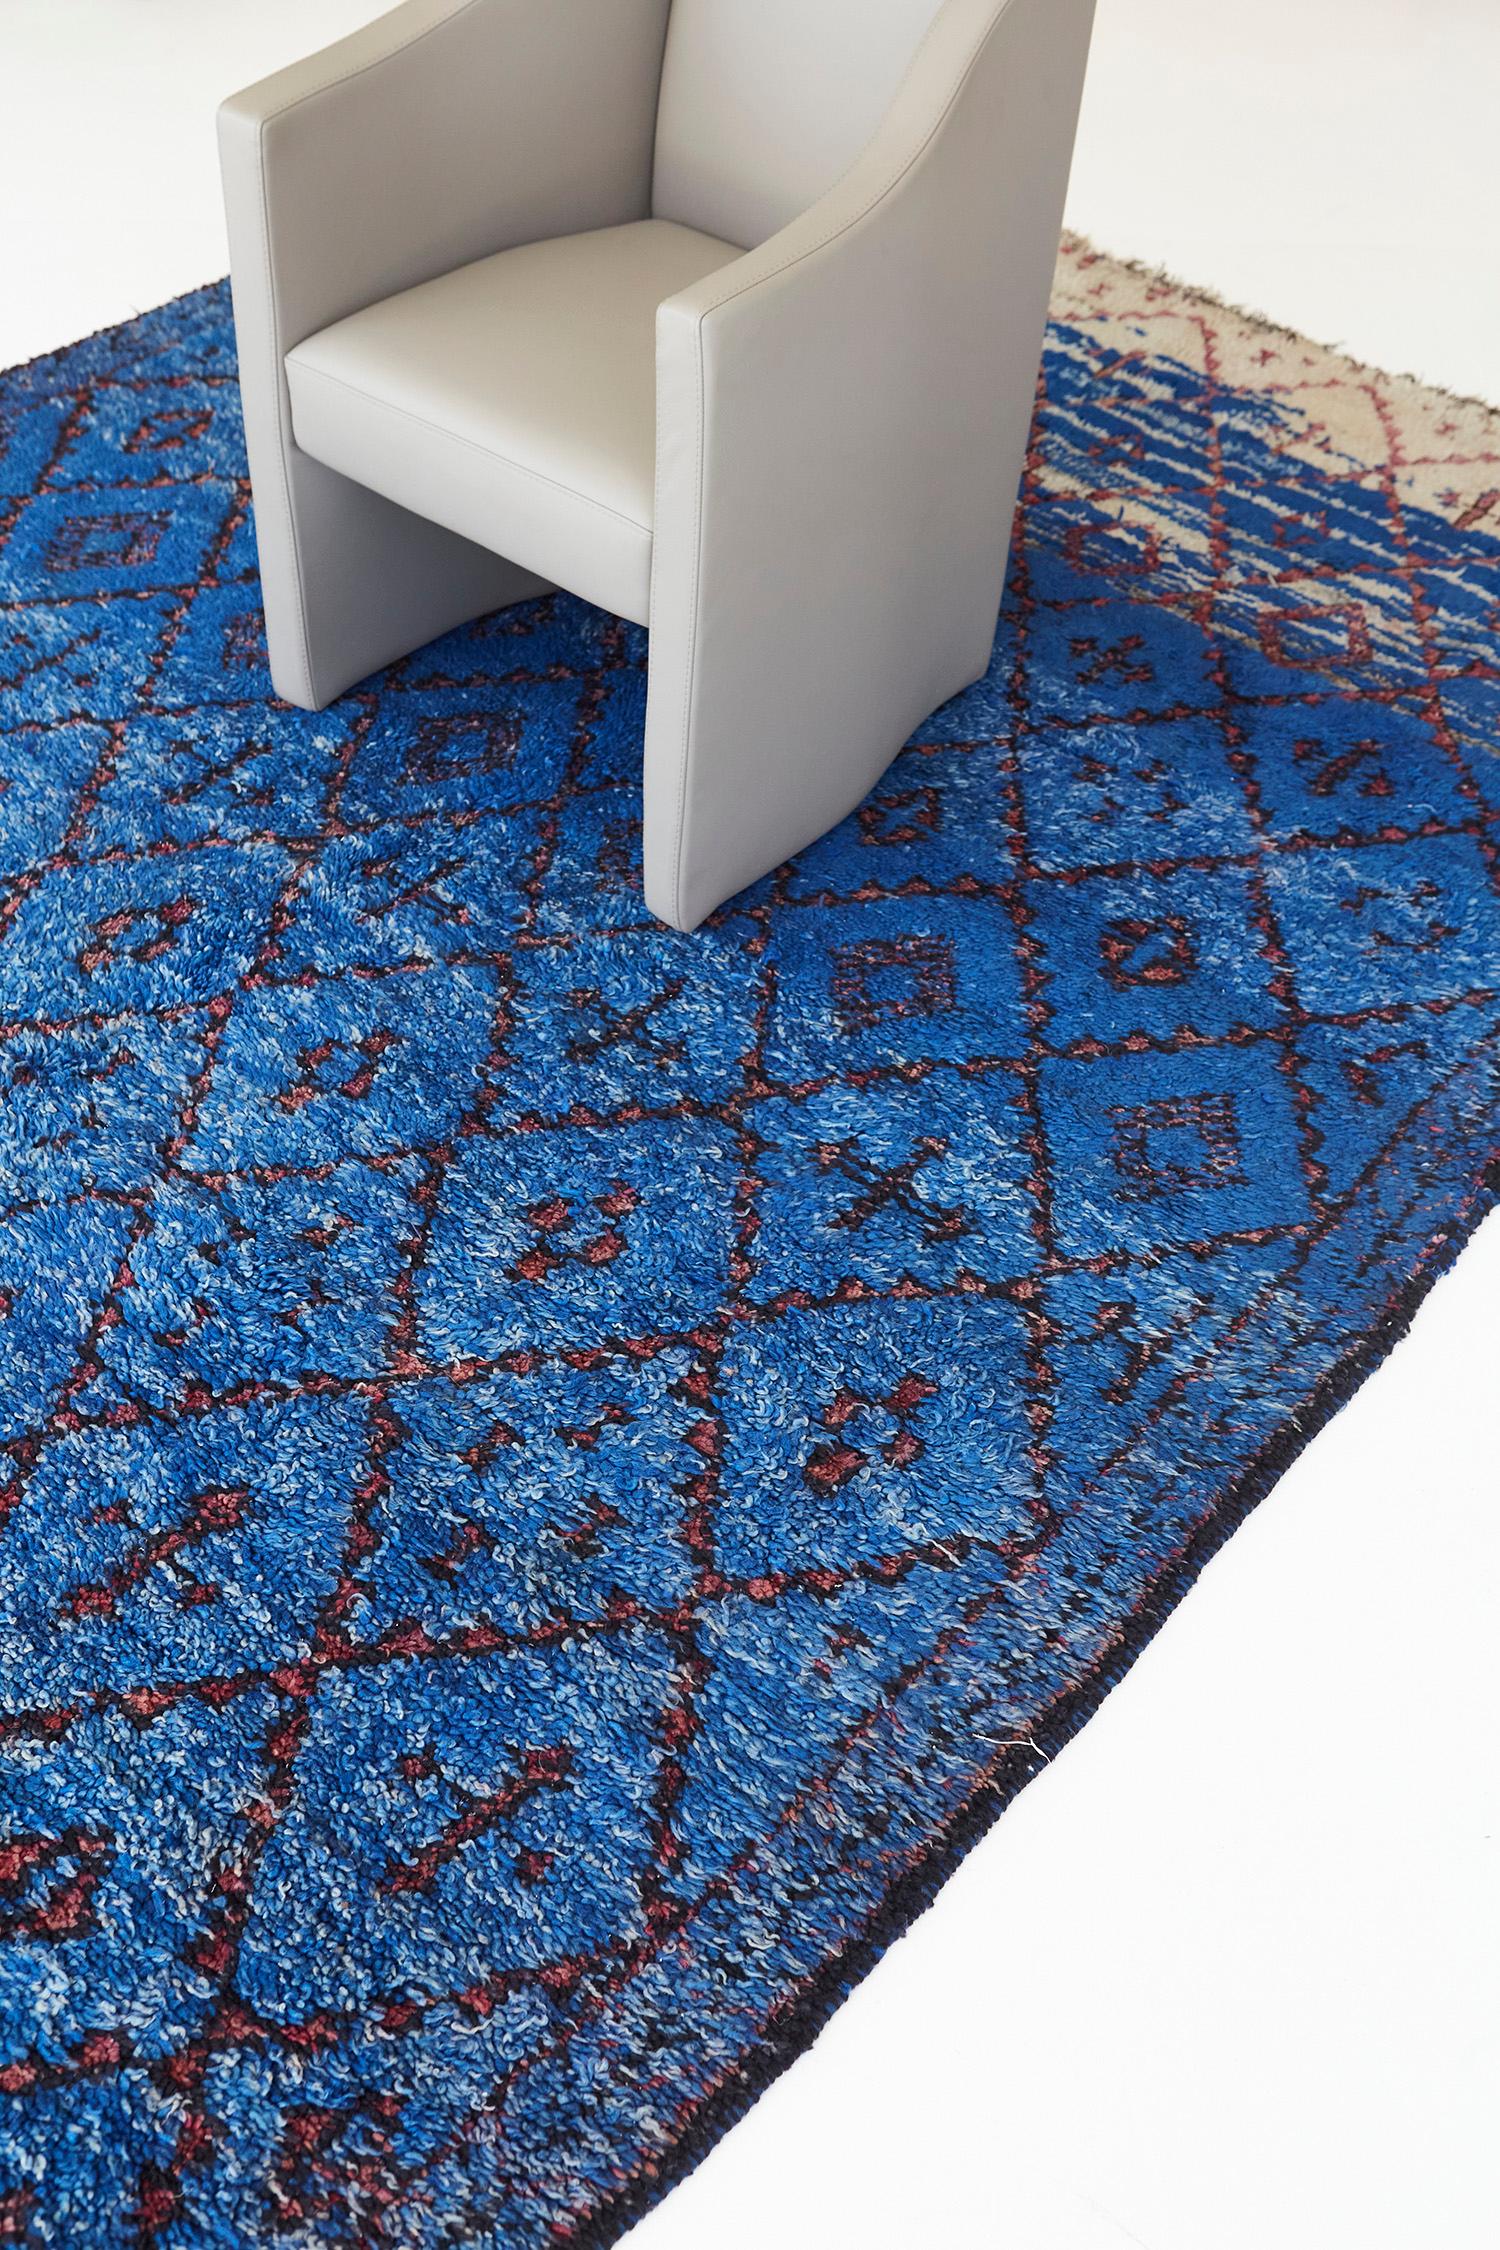 A breathtaking Vintage Moroccan Beni M’Guild Tribe rug that features the vibrant tones of azure blue and sand. Embodying these gorgeous symbolic lozenge panels with Berber elements running along the abrashed field. An exhilarating piece that will